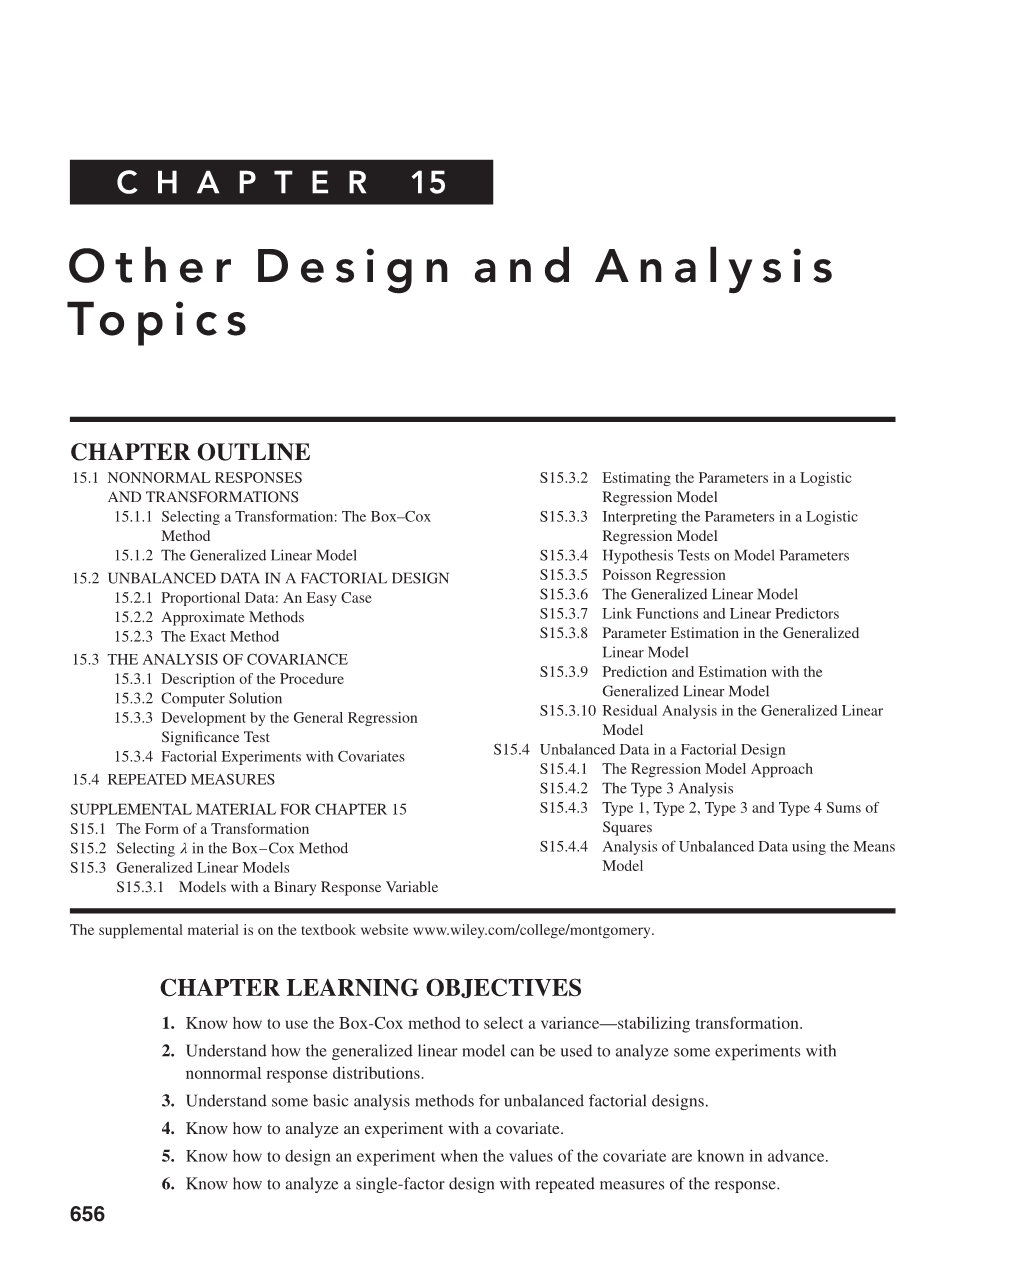 Other Design and Analysis Topics